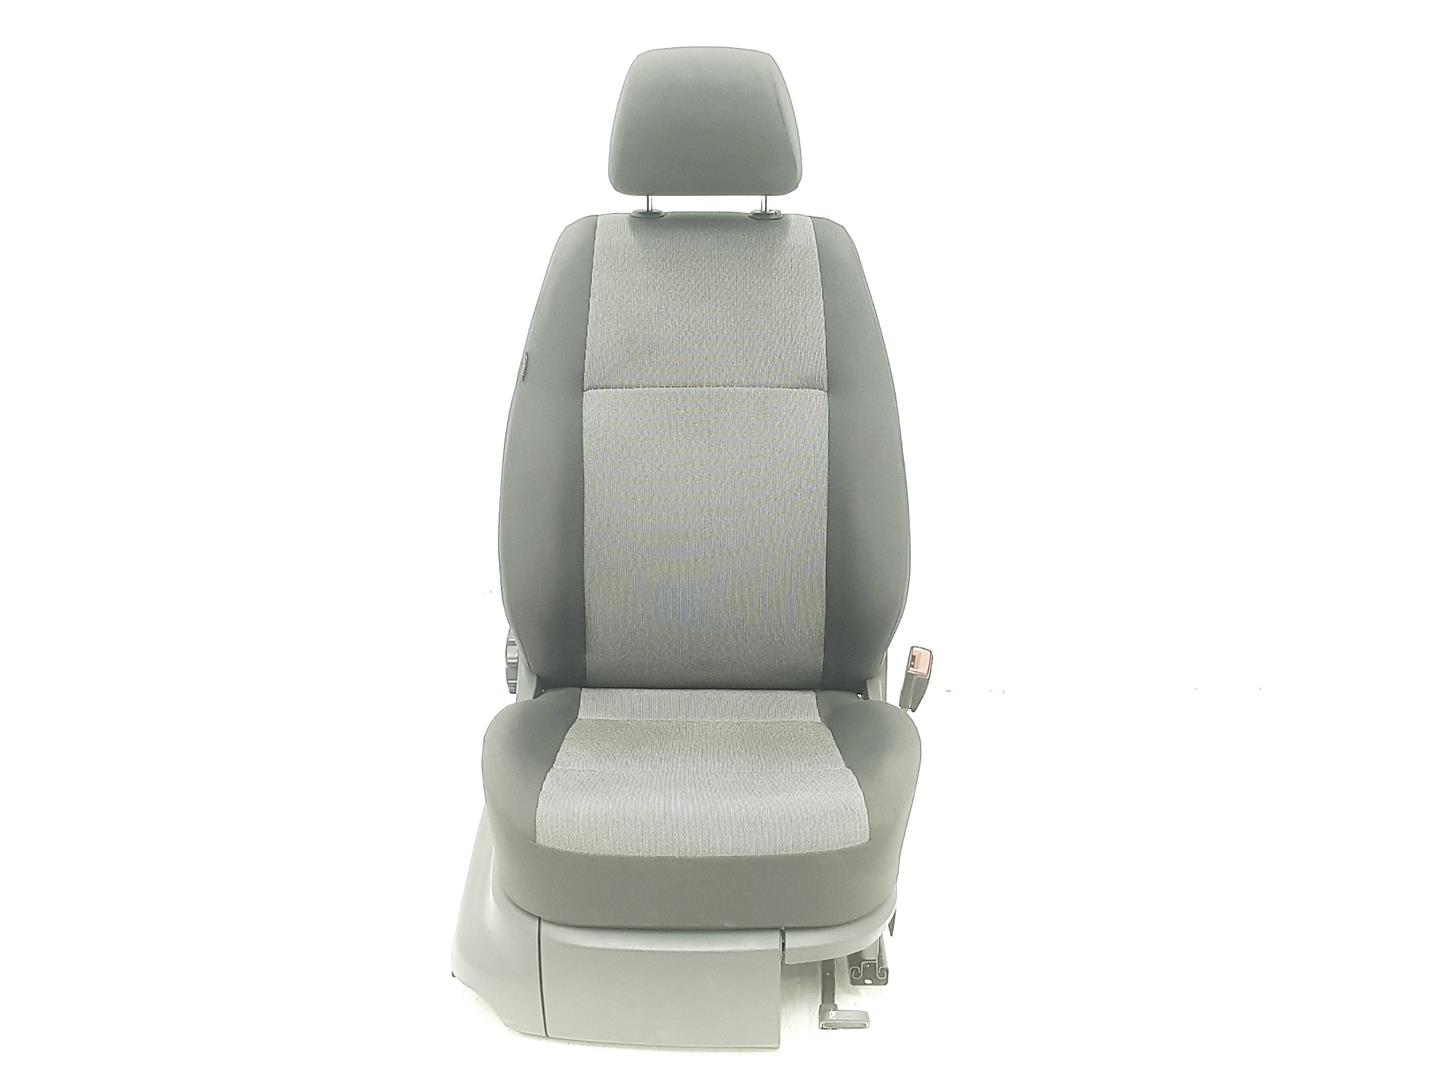 VOLKSWAGEN Caddy 4 generation (2015-2020) Front Right Seat ASIENTOTELA, ASIENTOACOMPAÑANTE 19852493